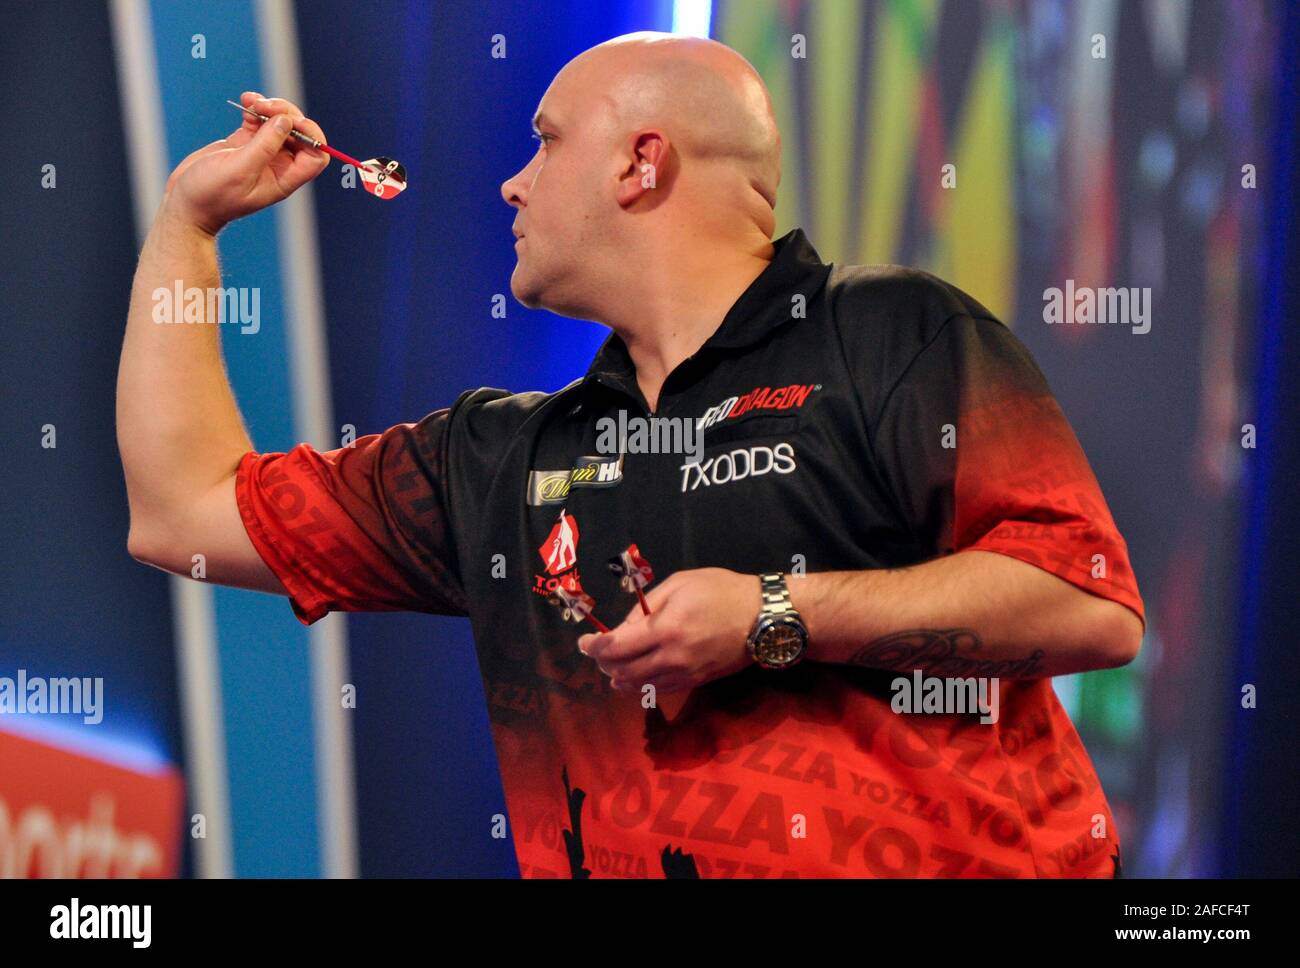 14 december 2019 London, Great Britain William Hill World Darts Championship  Jamie Hughes during day 2 of the William Hill World Darts Championship of  darts at Alexandra Palace (Ally Pally) in Londen